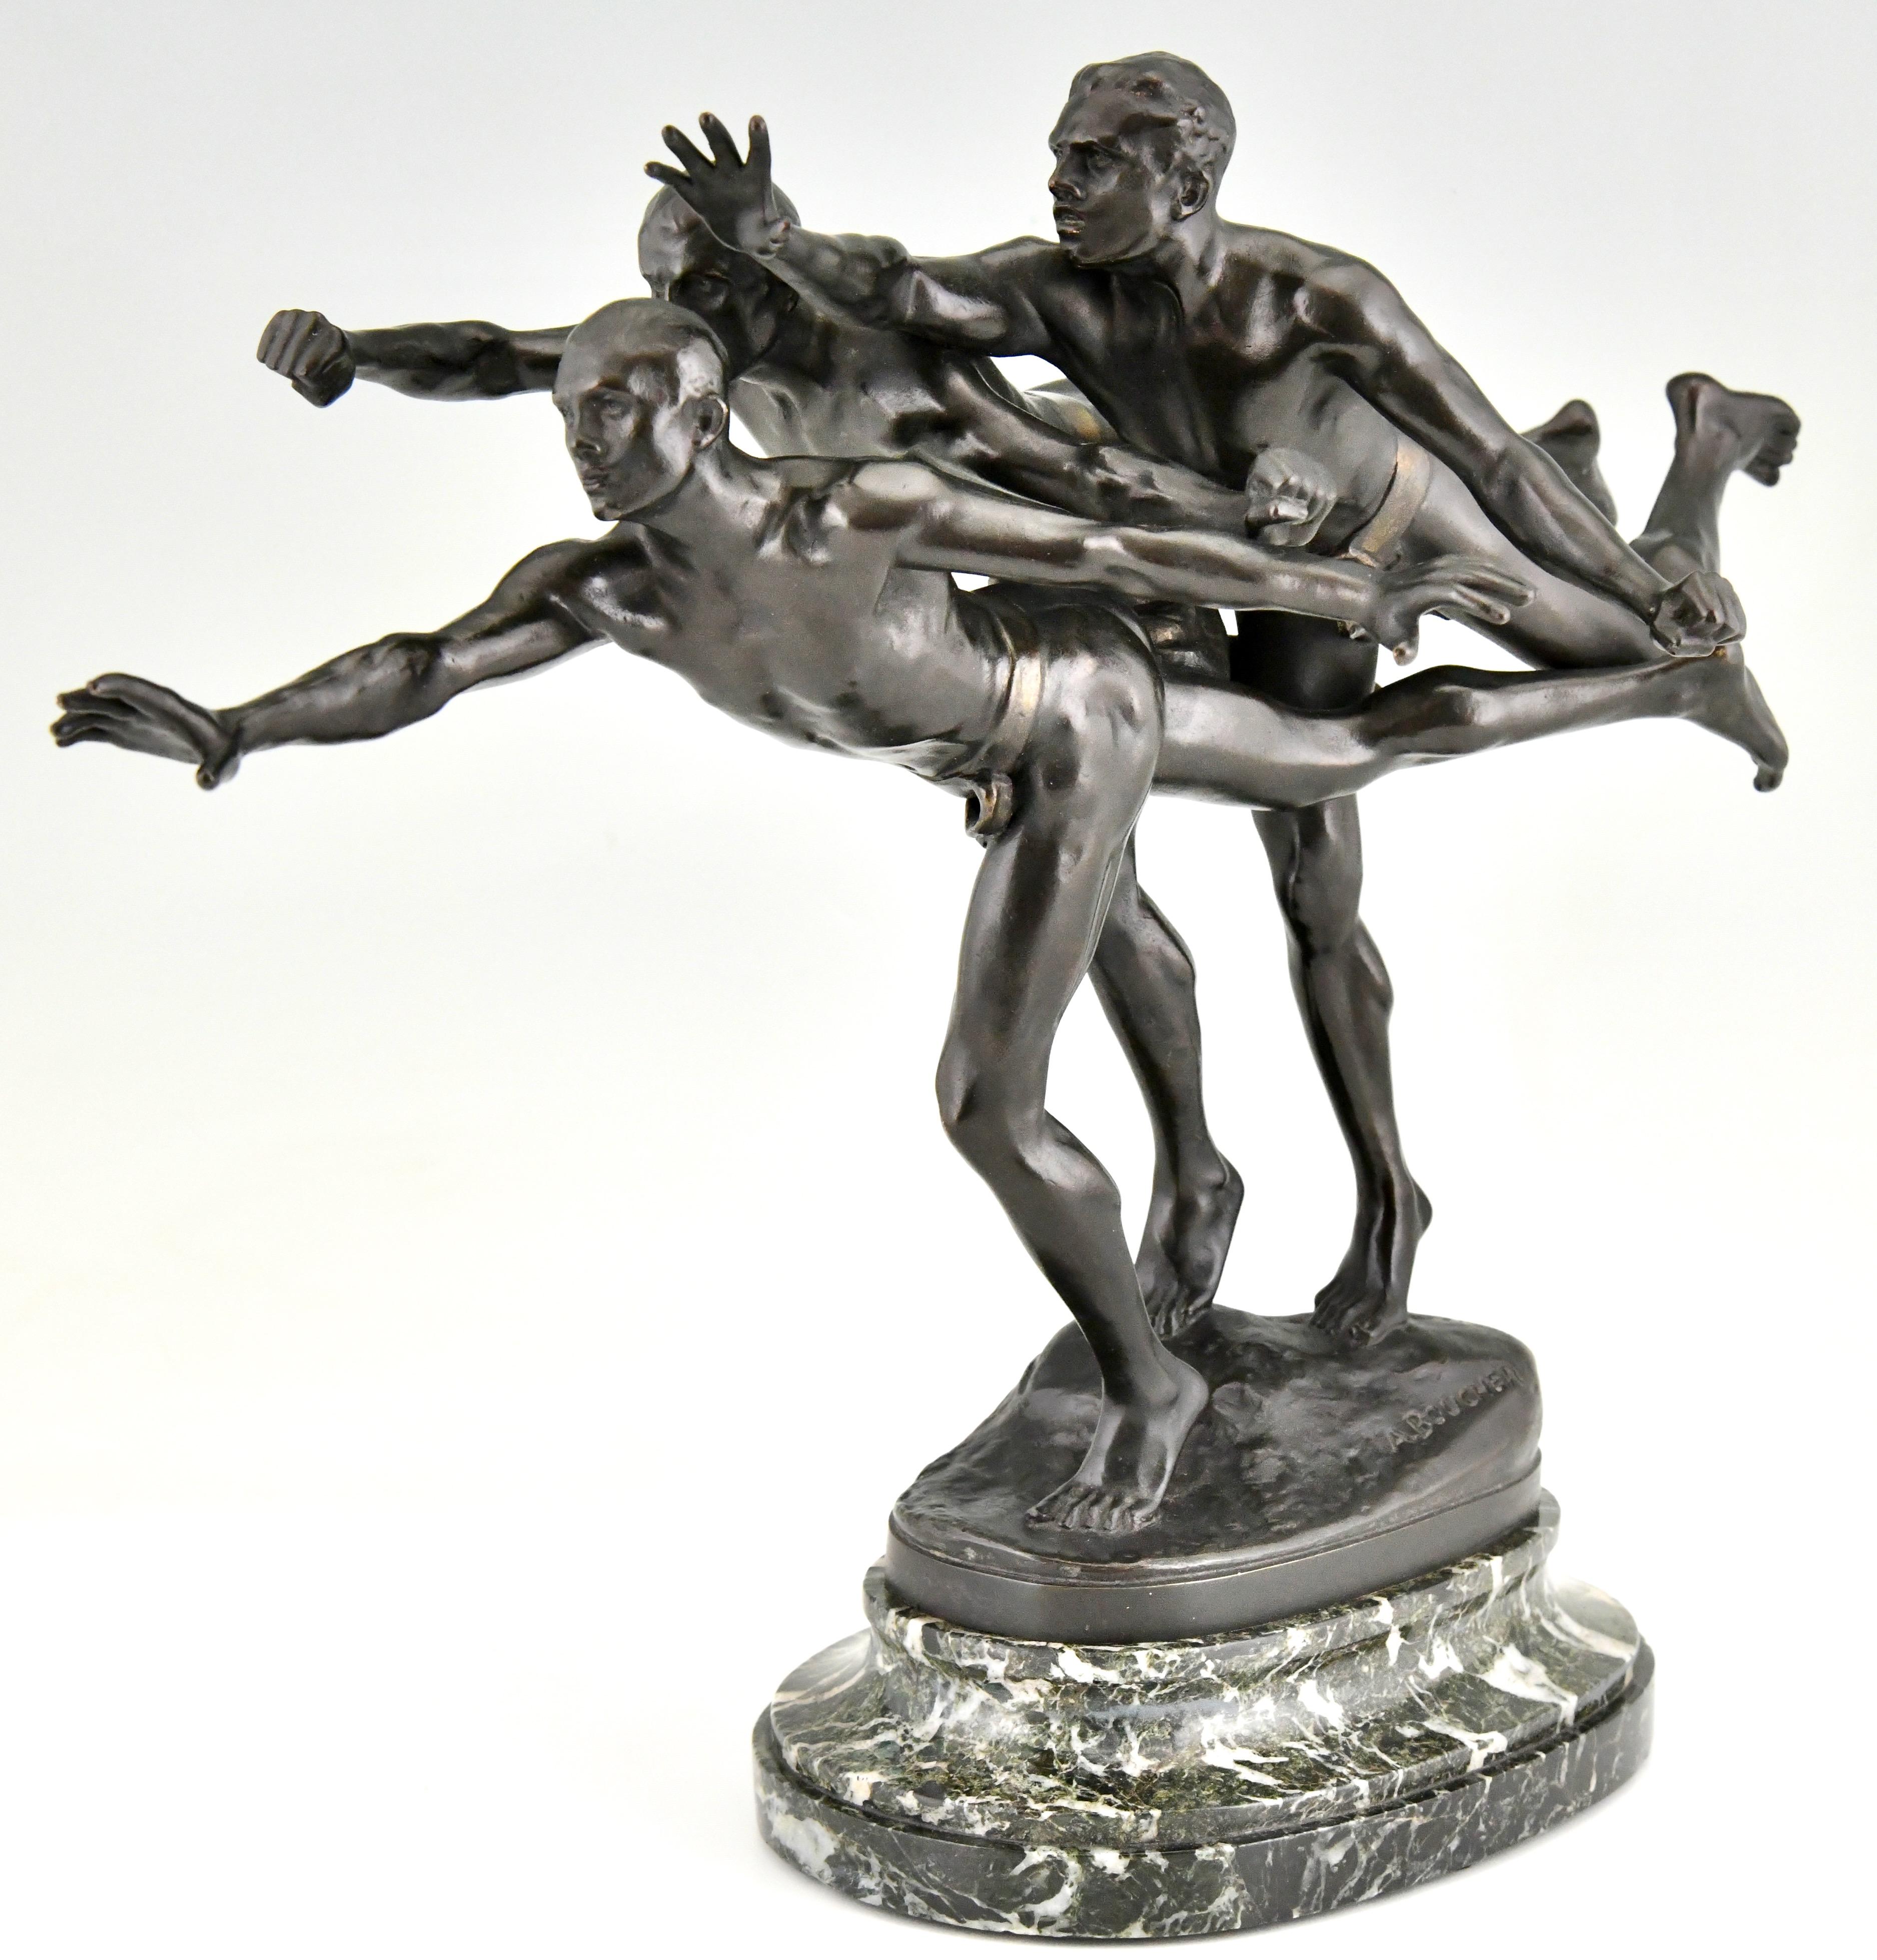 Romantic Au But, Antique Bronze Sculpture 3 Nude Runners by Alfred Boucher, France, 1890